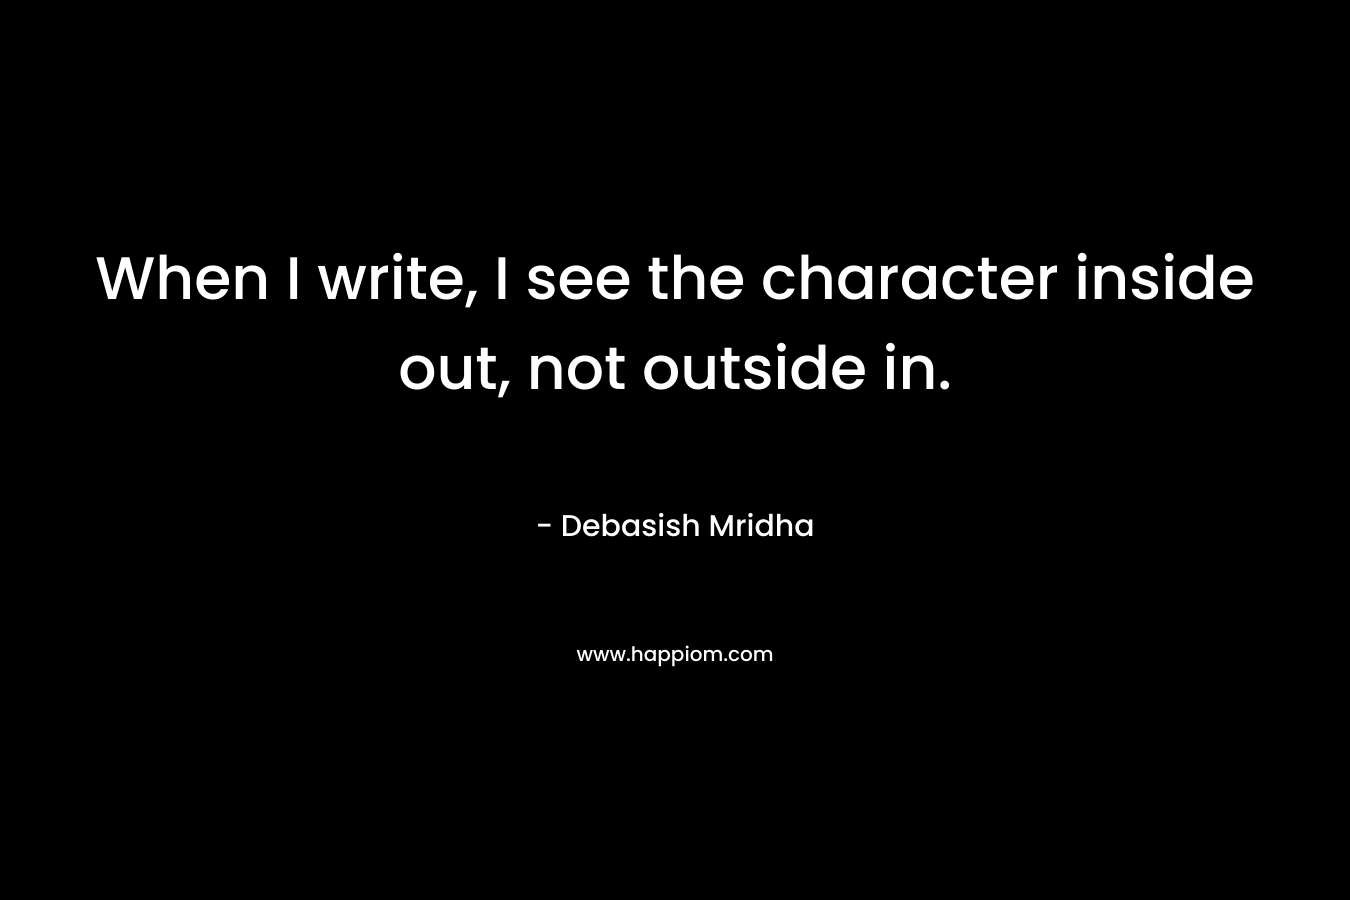 When I write, I see the character inside out, not outside in.